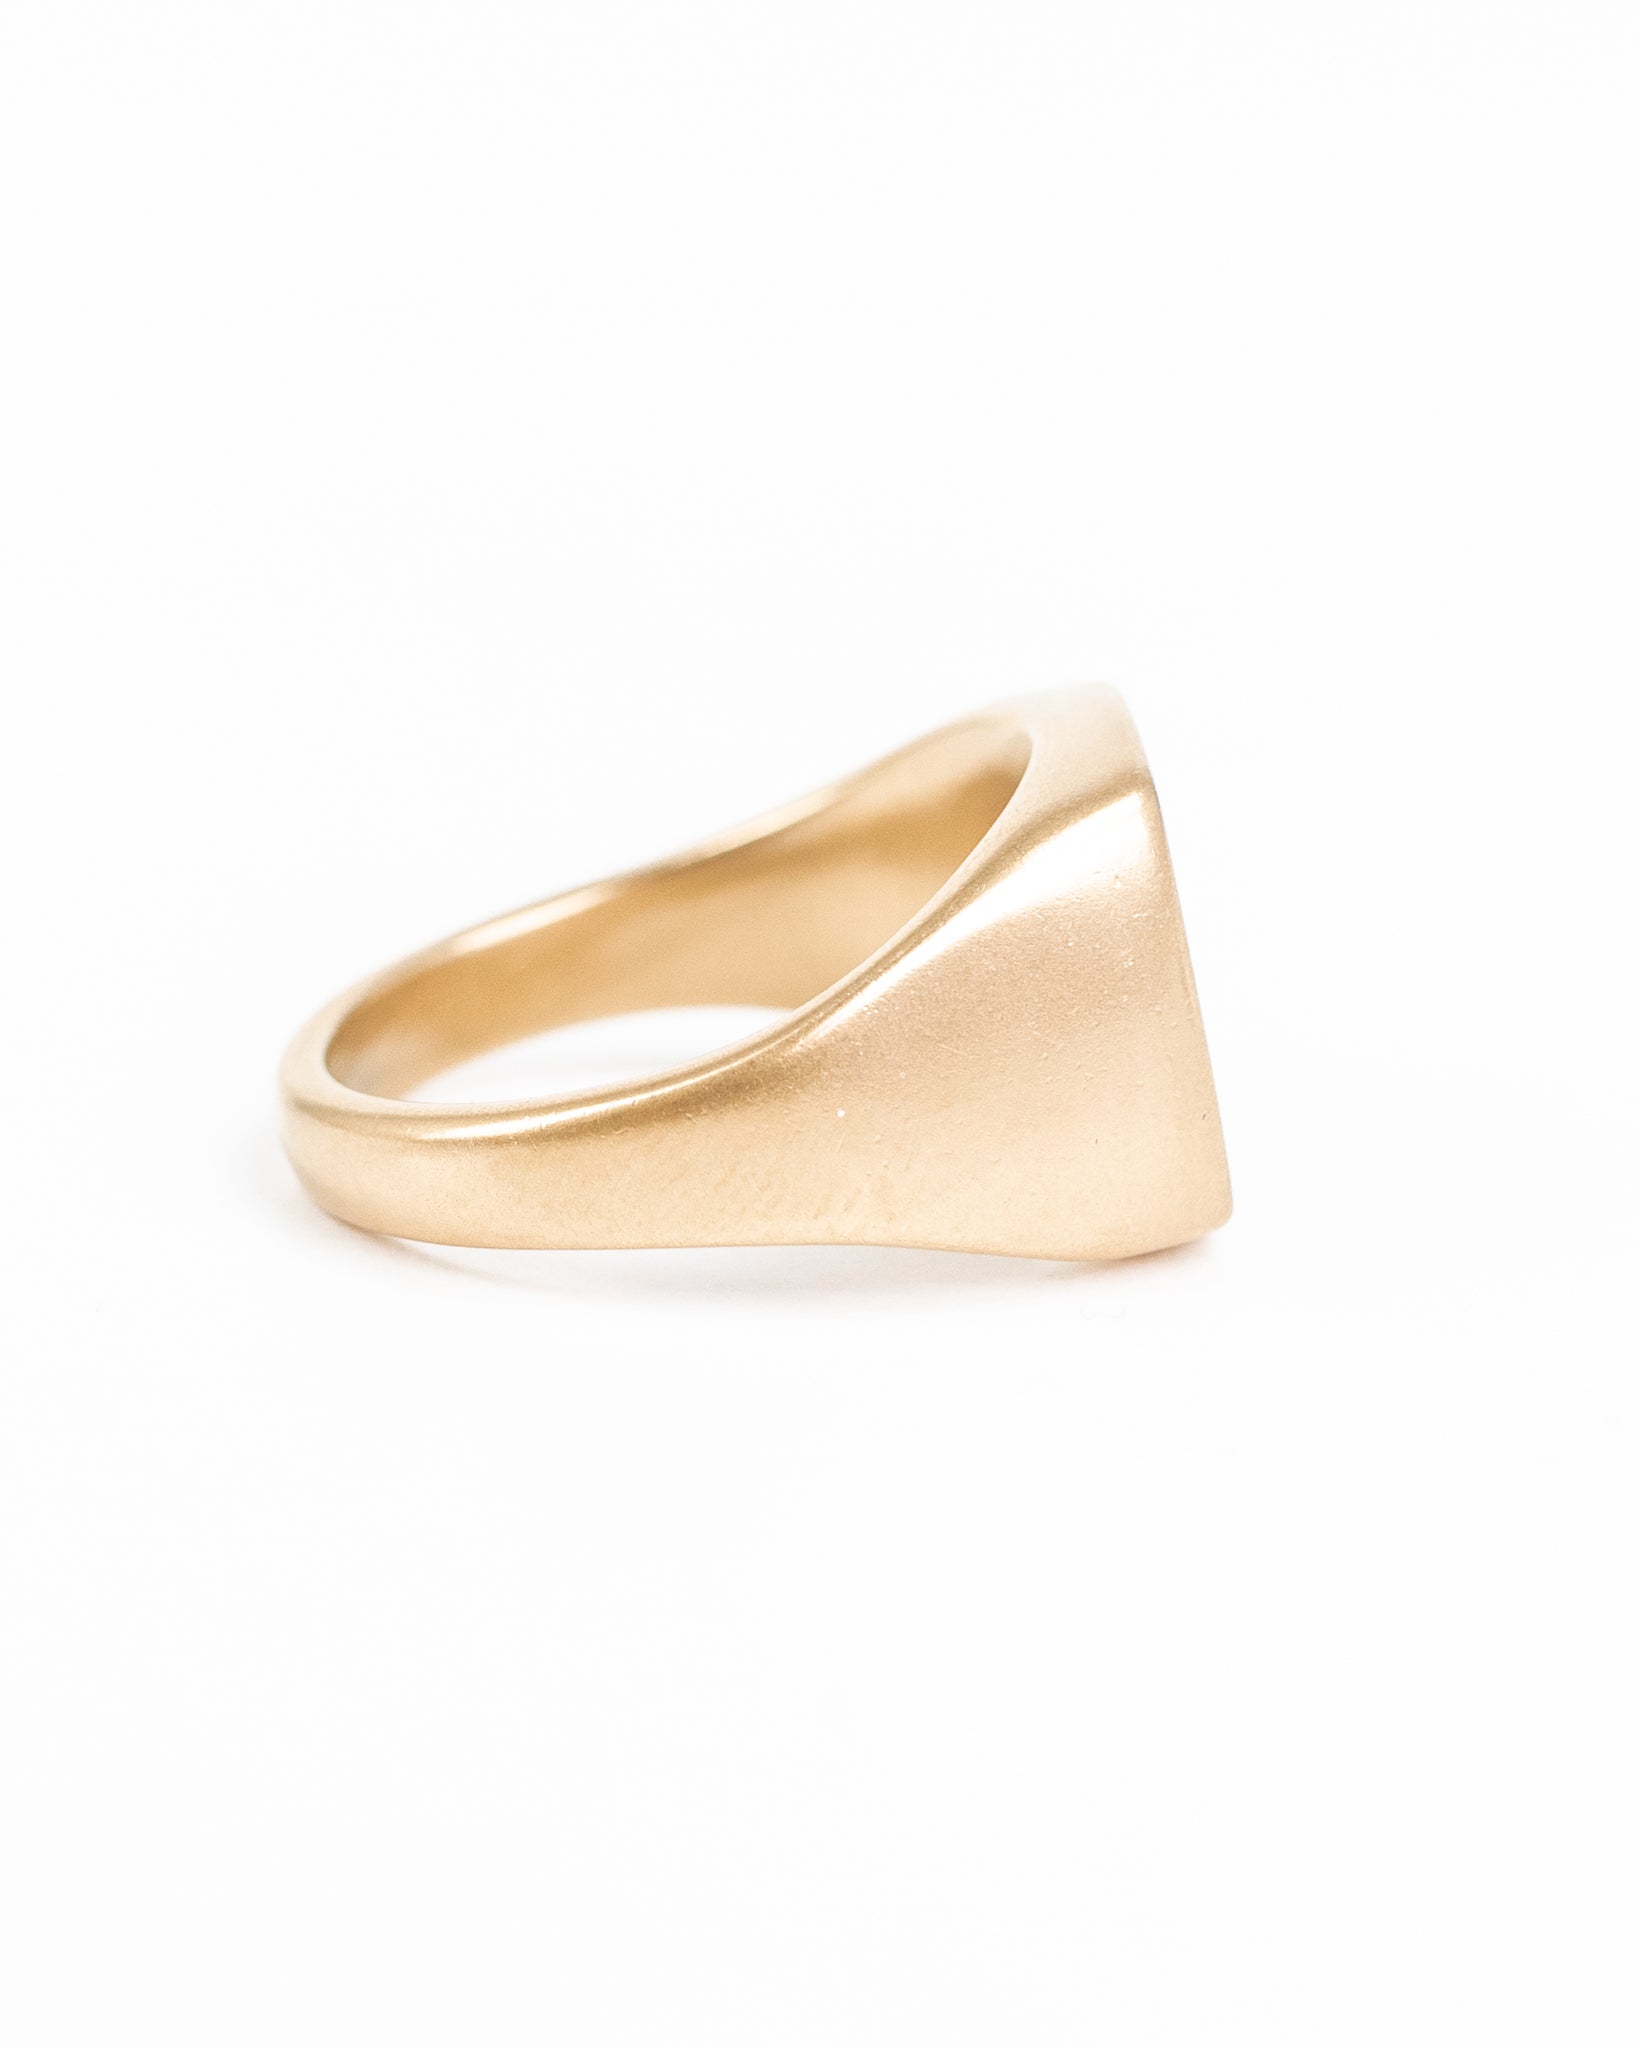 Knutte Ring - Gold